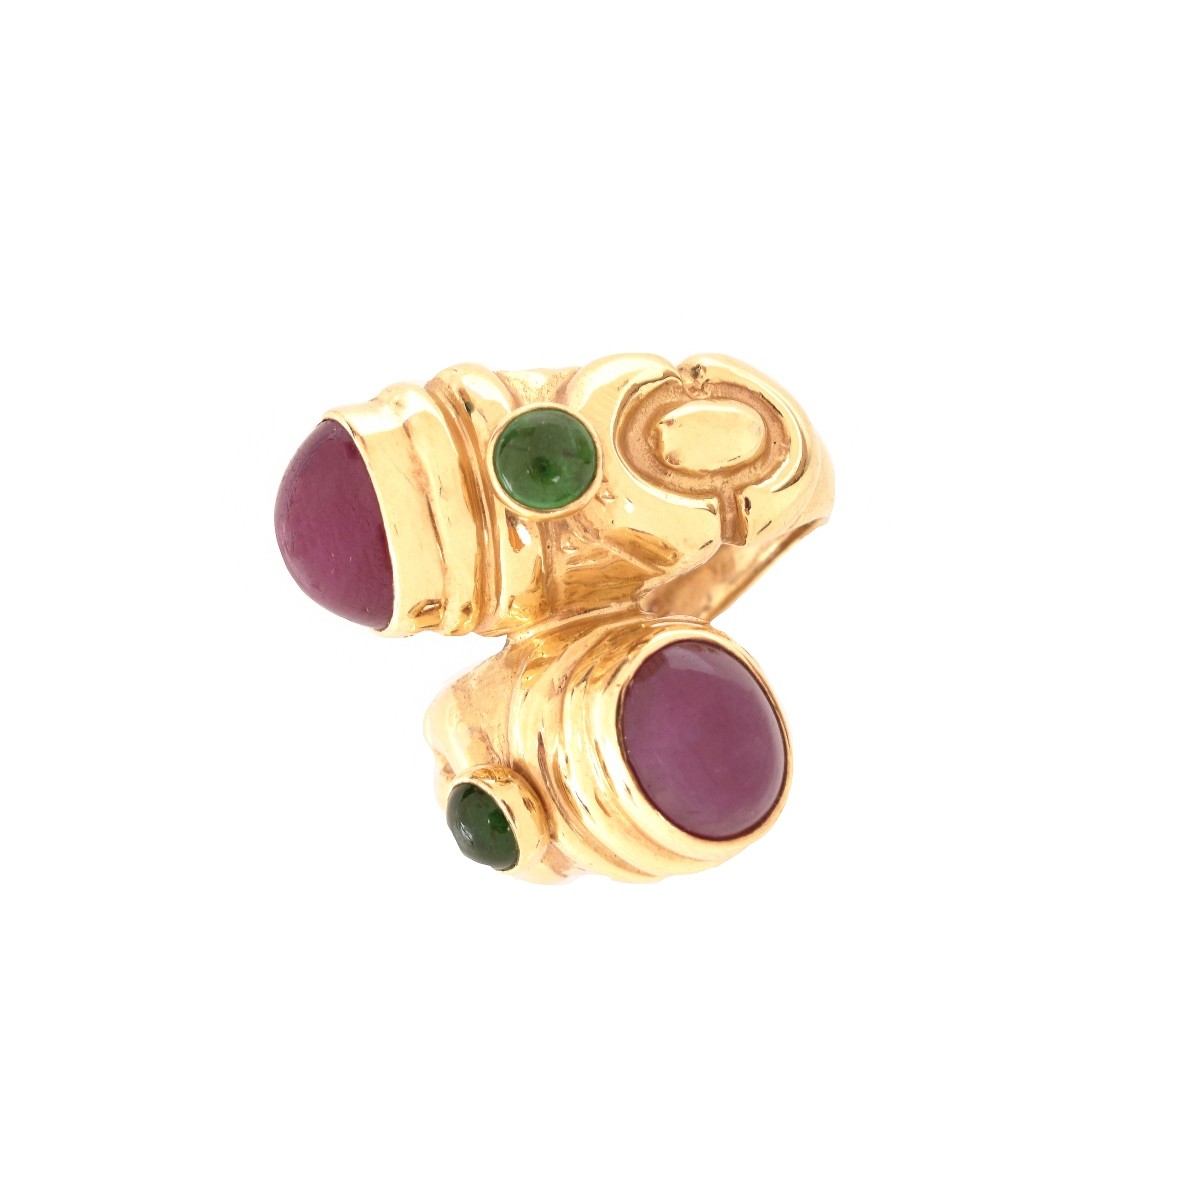 Vintage Ruby, Emerald and 14K Ring